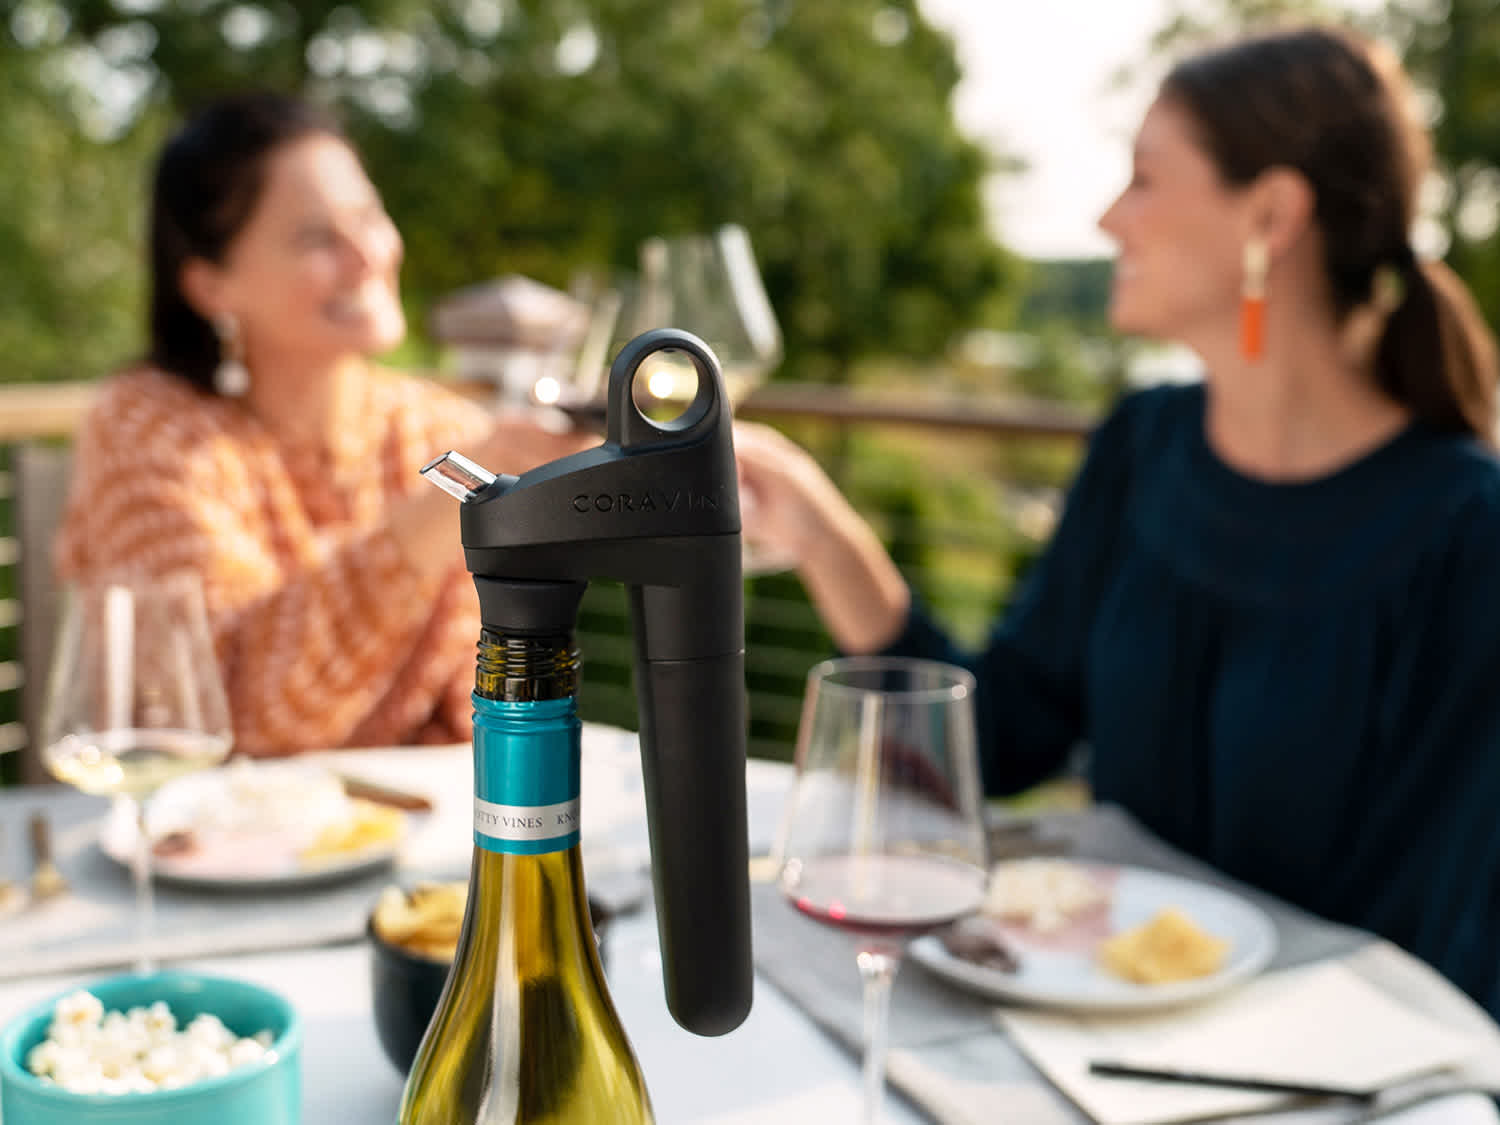 Pivot Wine Preservation System on bottle with women drinking wine and smiling in the background